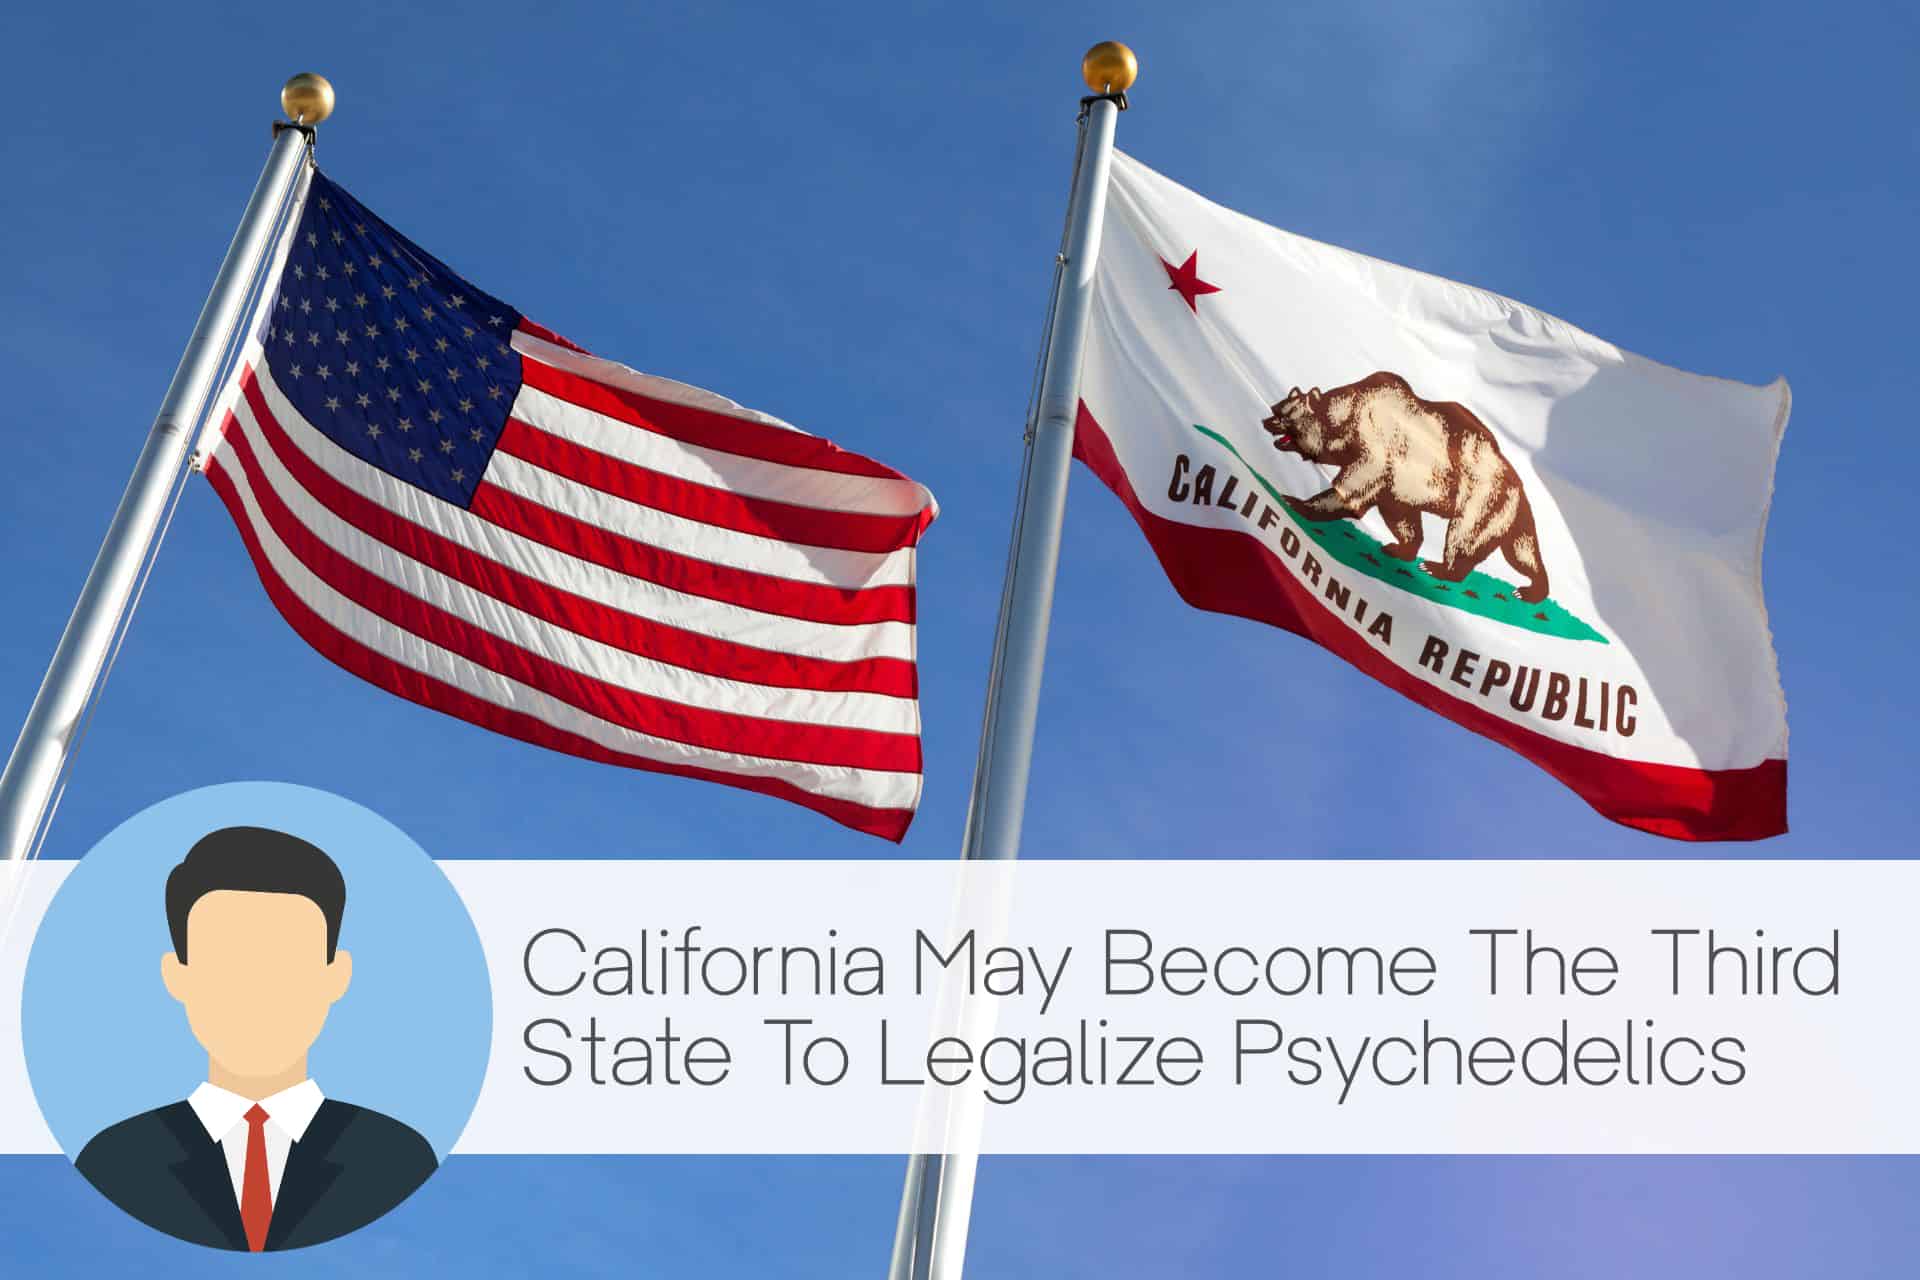 Legalize Psychedelics, California